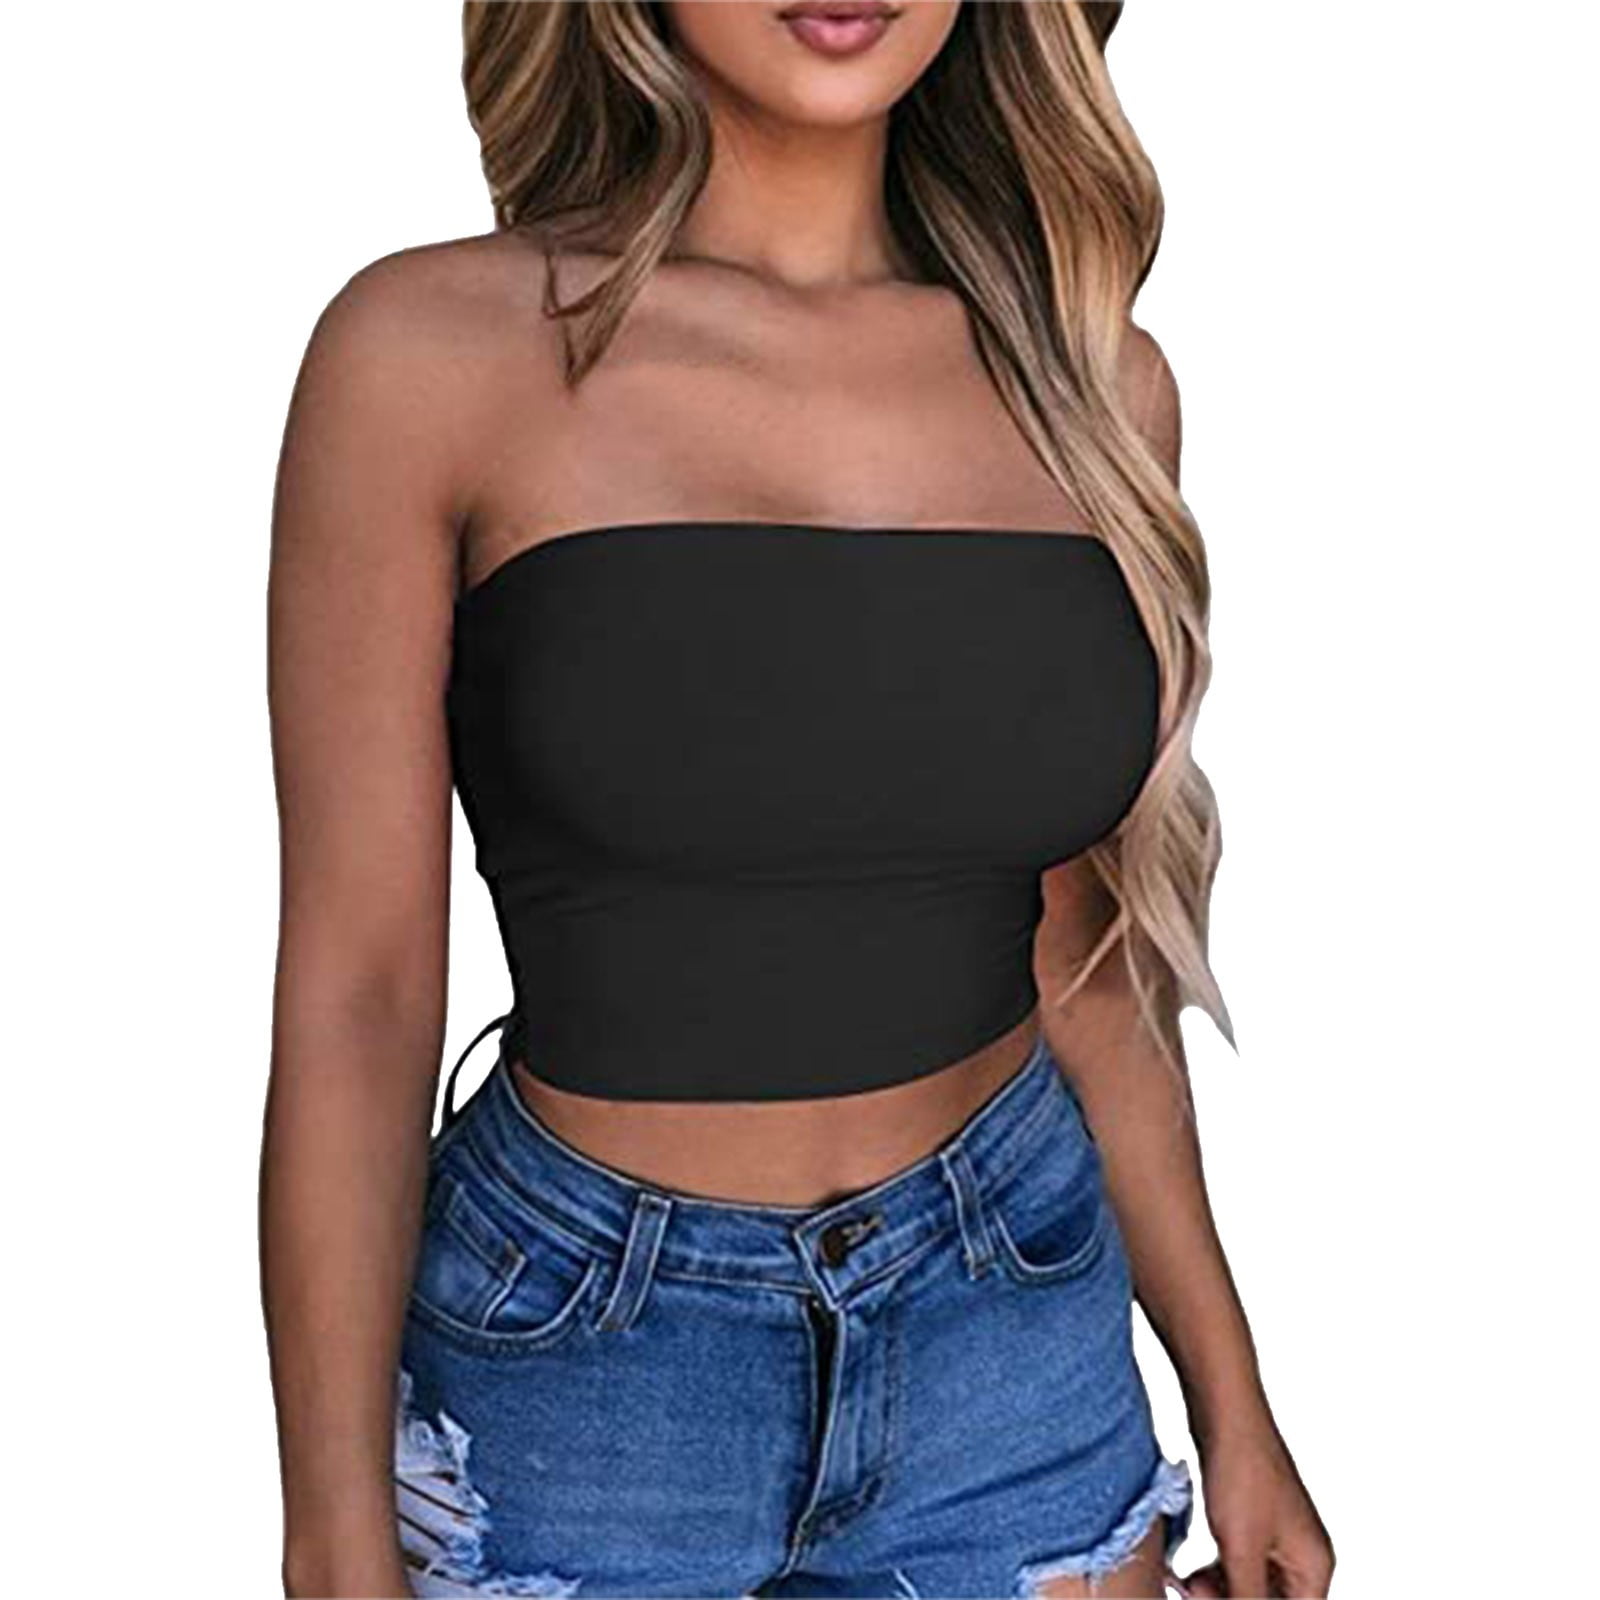 Pgeraug Polyester,Spandex Womens Tops Solid Color Crop Top Strapless  Bandeau Tube Top Sleeveless Backless Tank Cami Vest Tanks for Women Blue M  